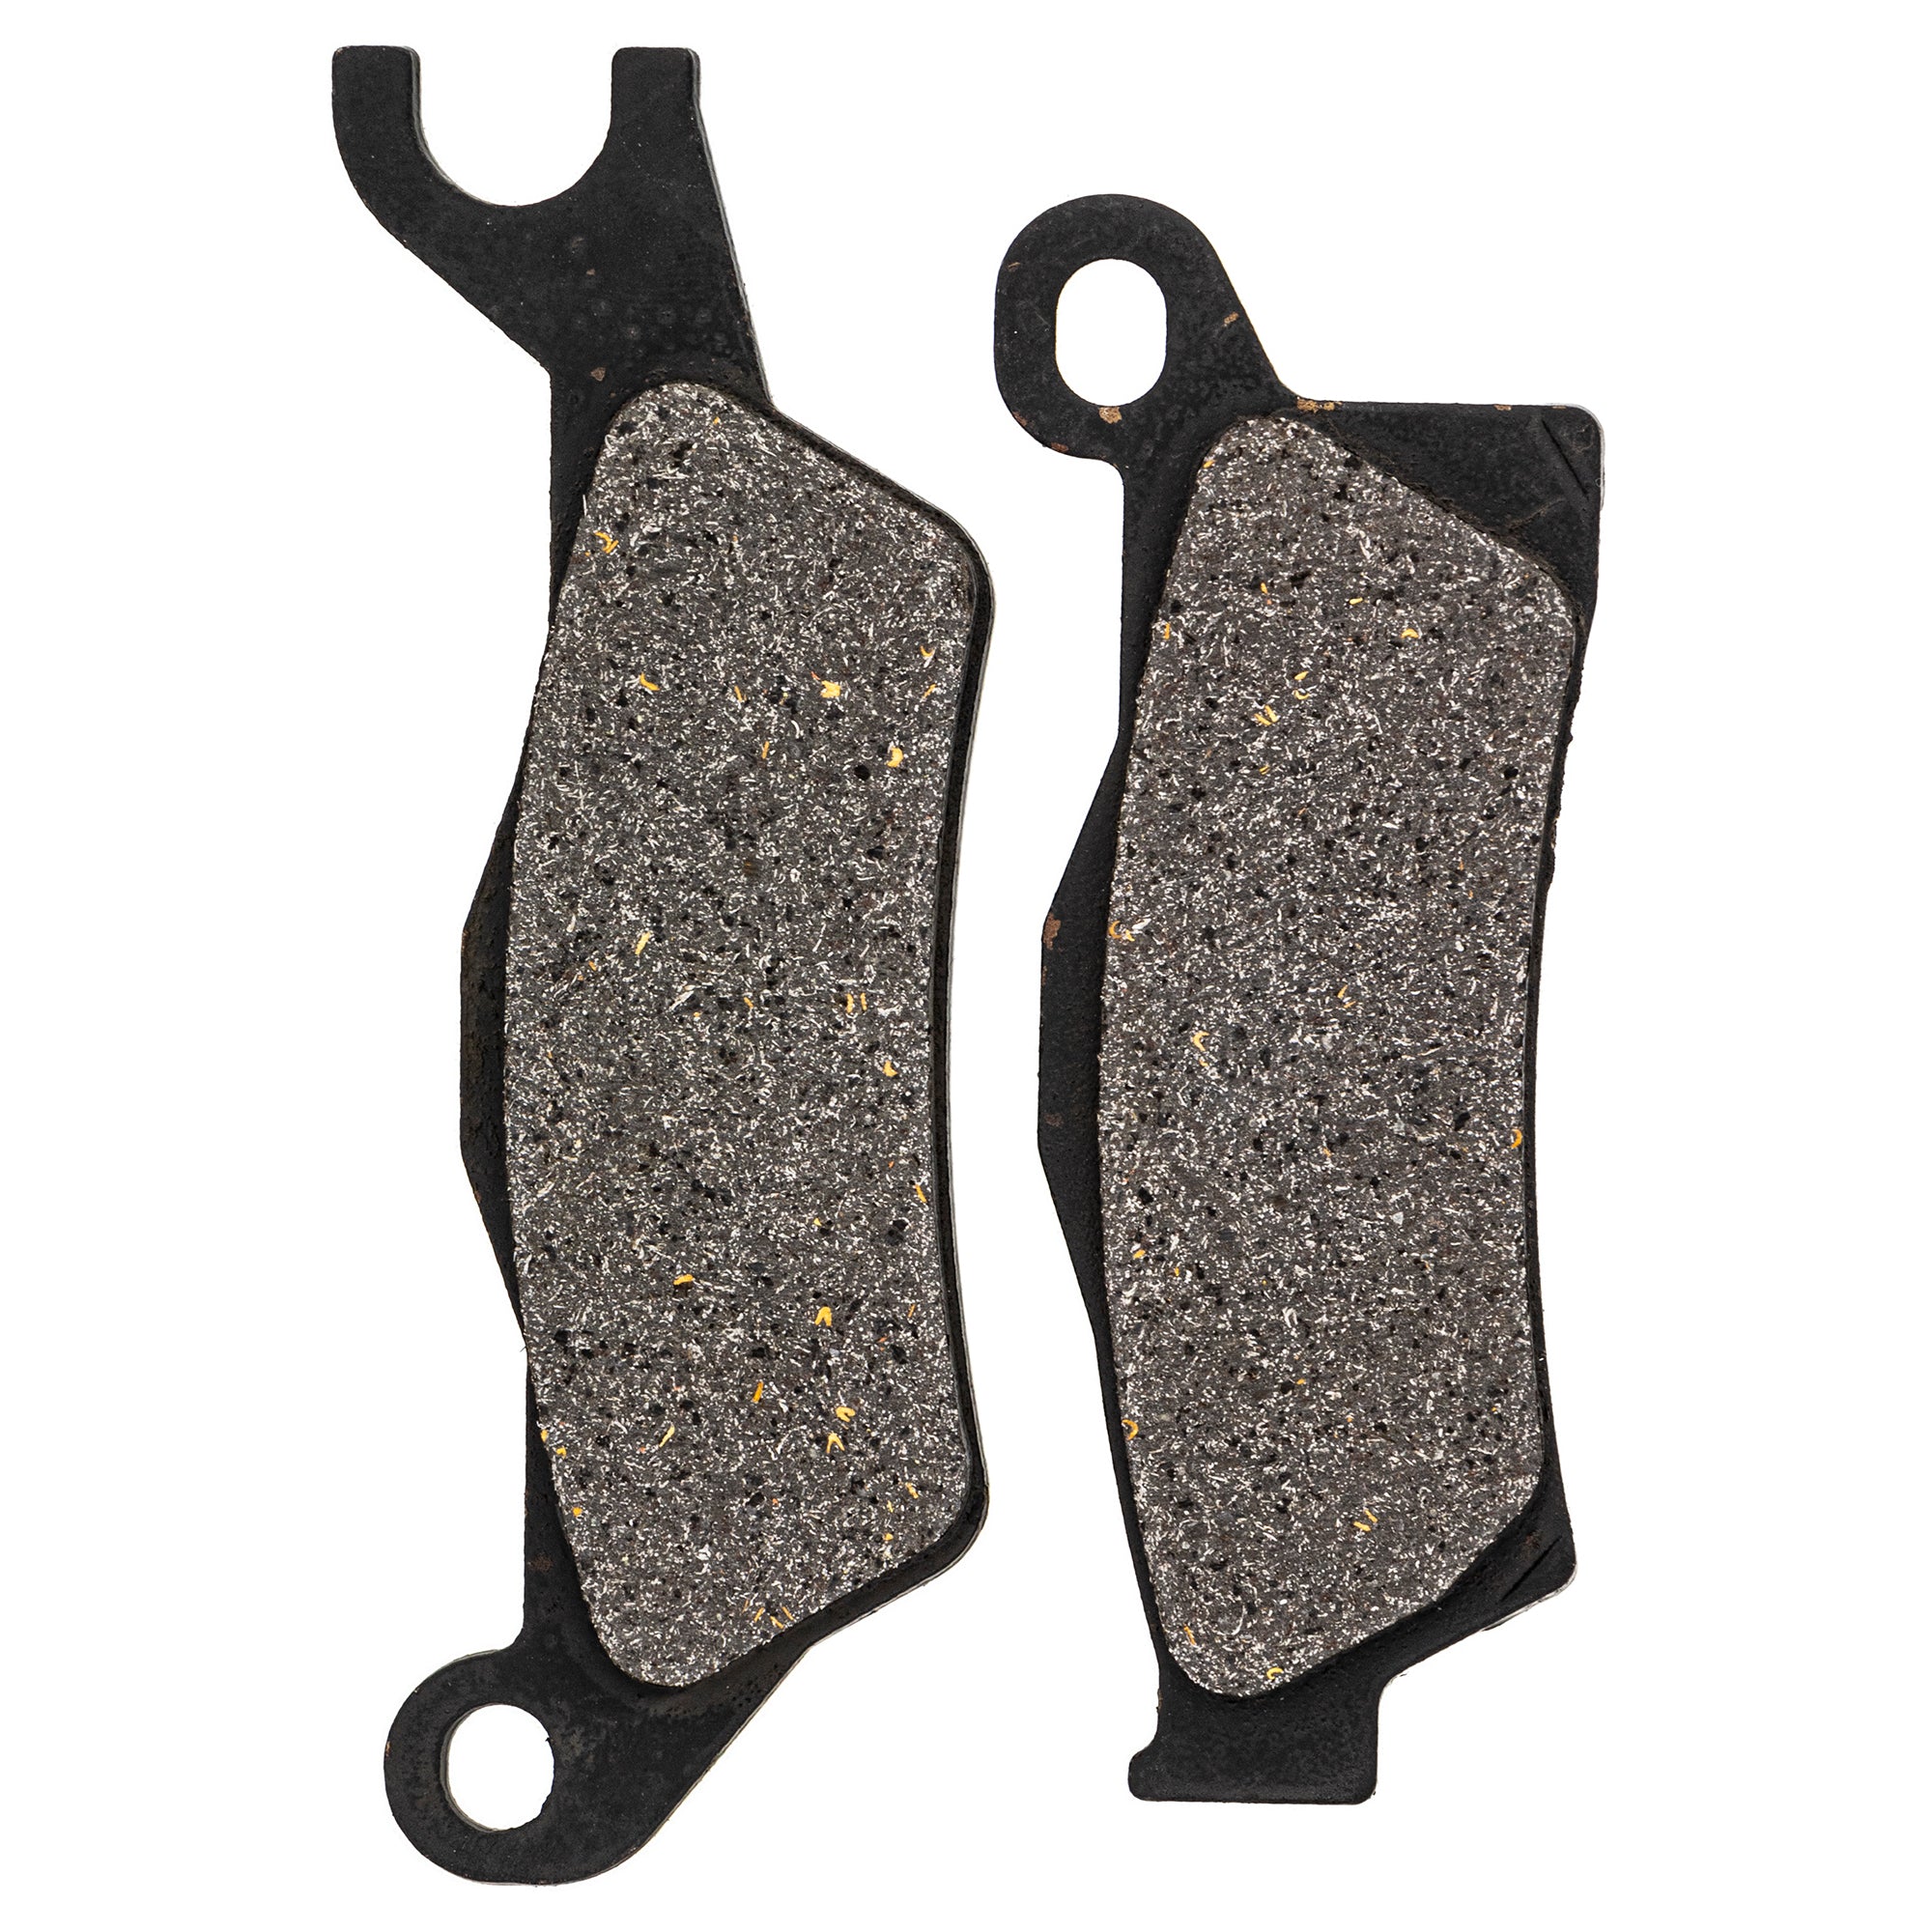 Brake Pad Kit for Can-Am Renegade Outlander L Max Front Rear